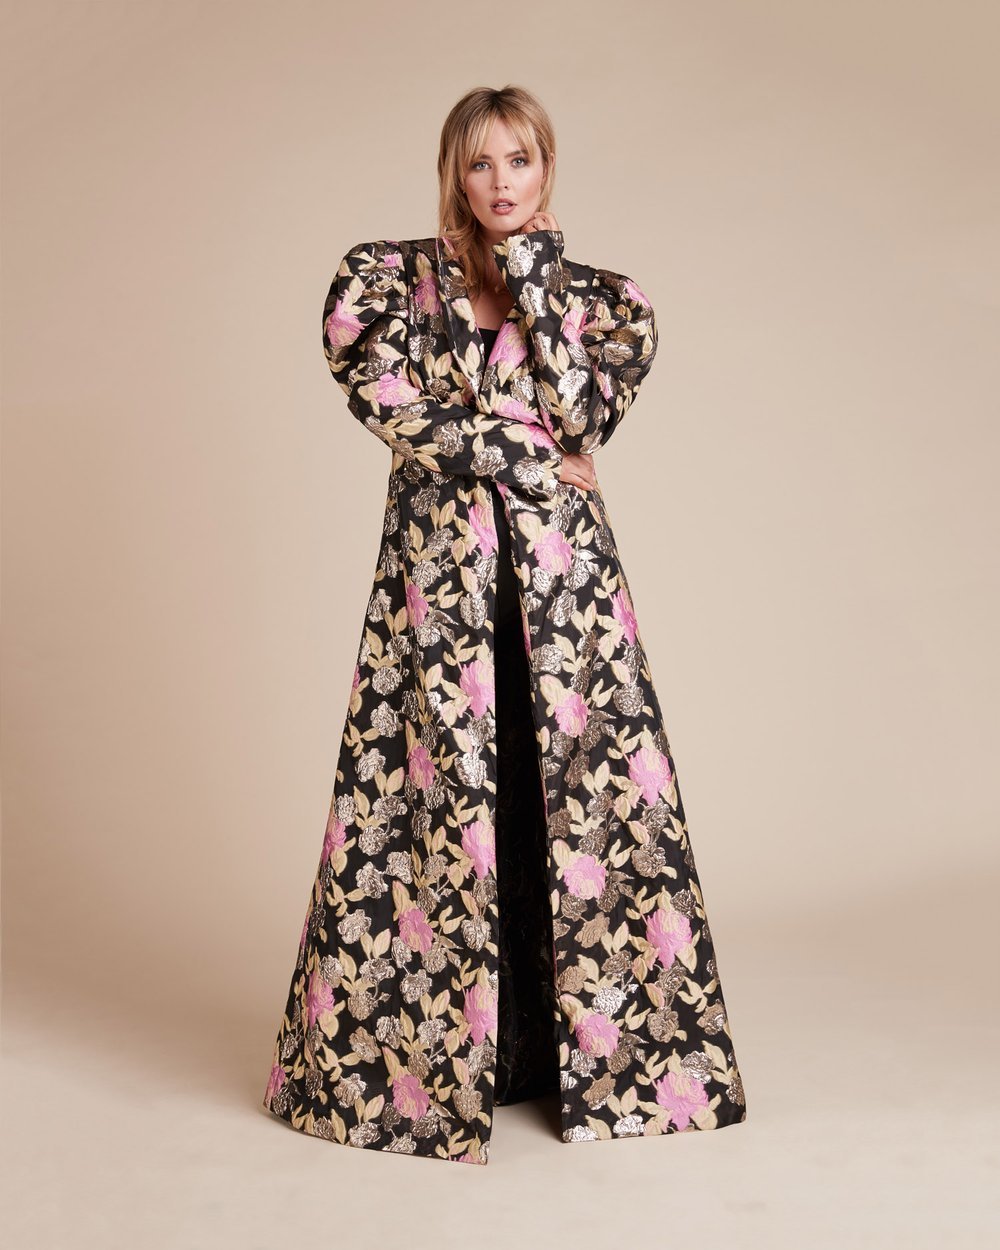 Luxury Plus SIze Fashion Finds at 11 Honore: CHRISTIAN SIRIANO Psychadelic Floral Evening Plus Size Coat